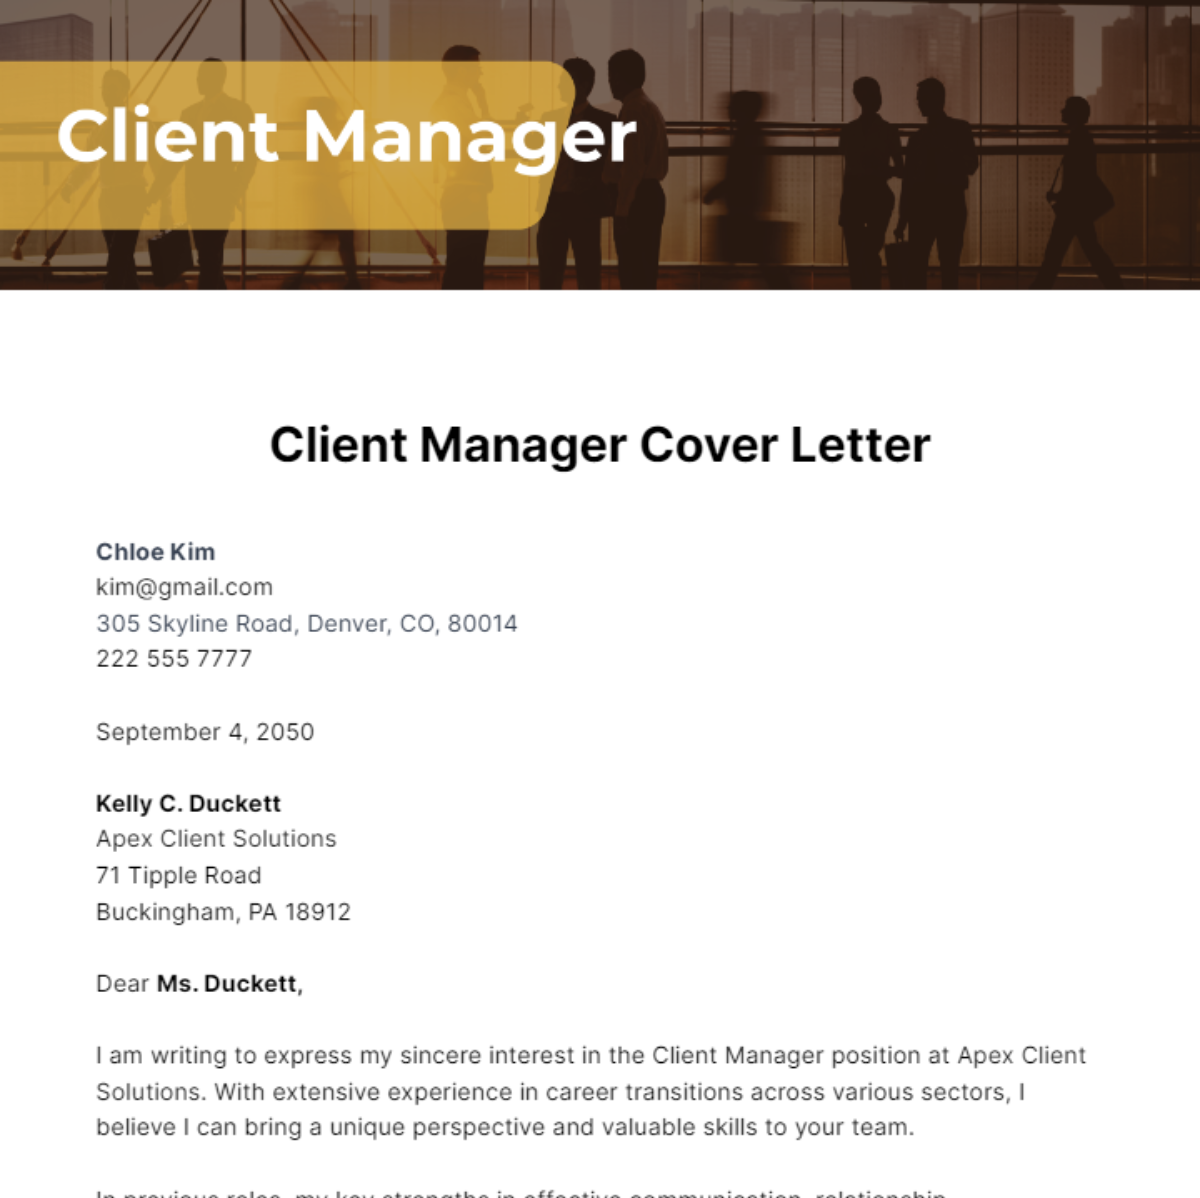 Client Manager Cover Letter Template